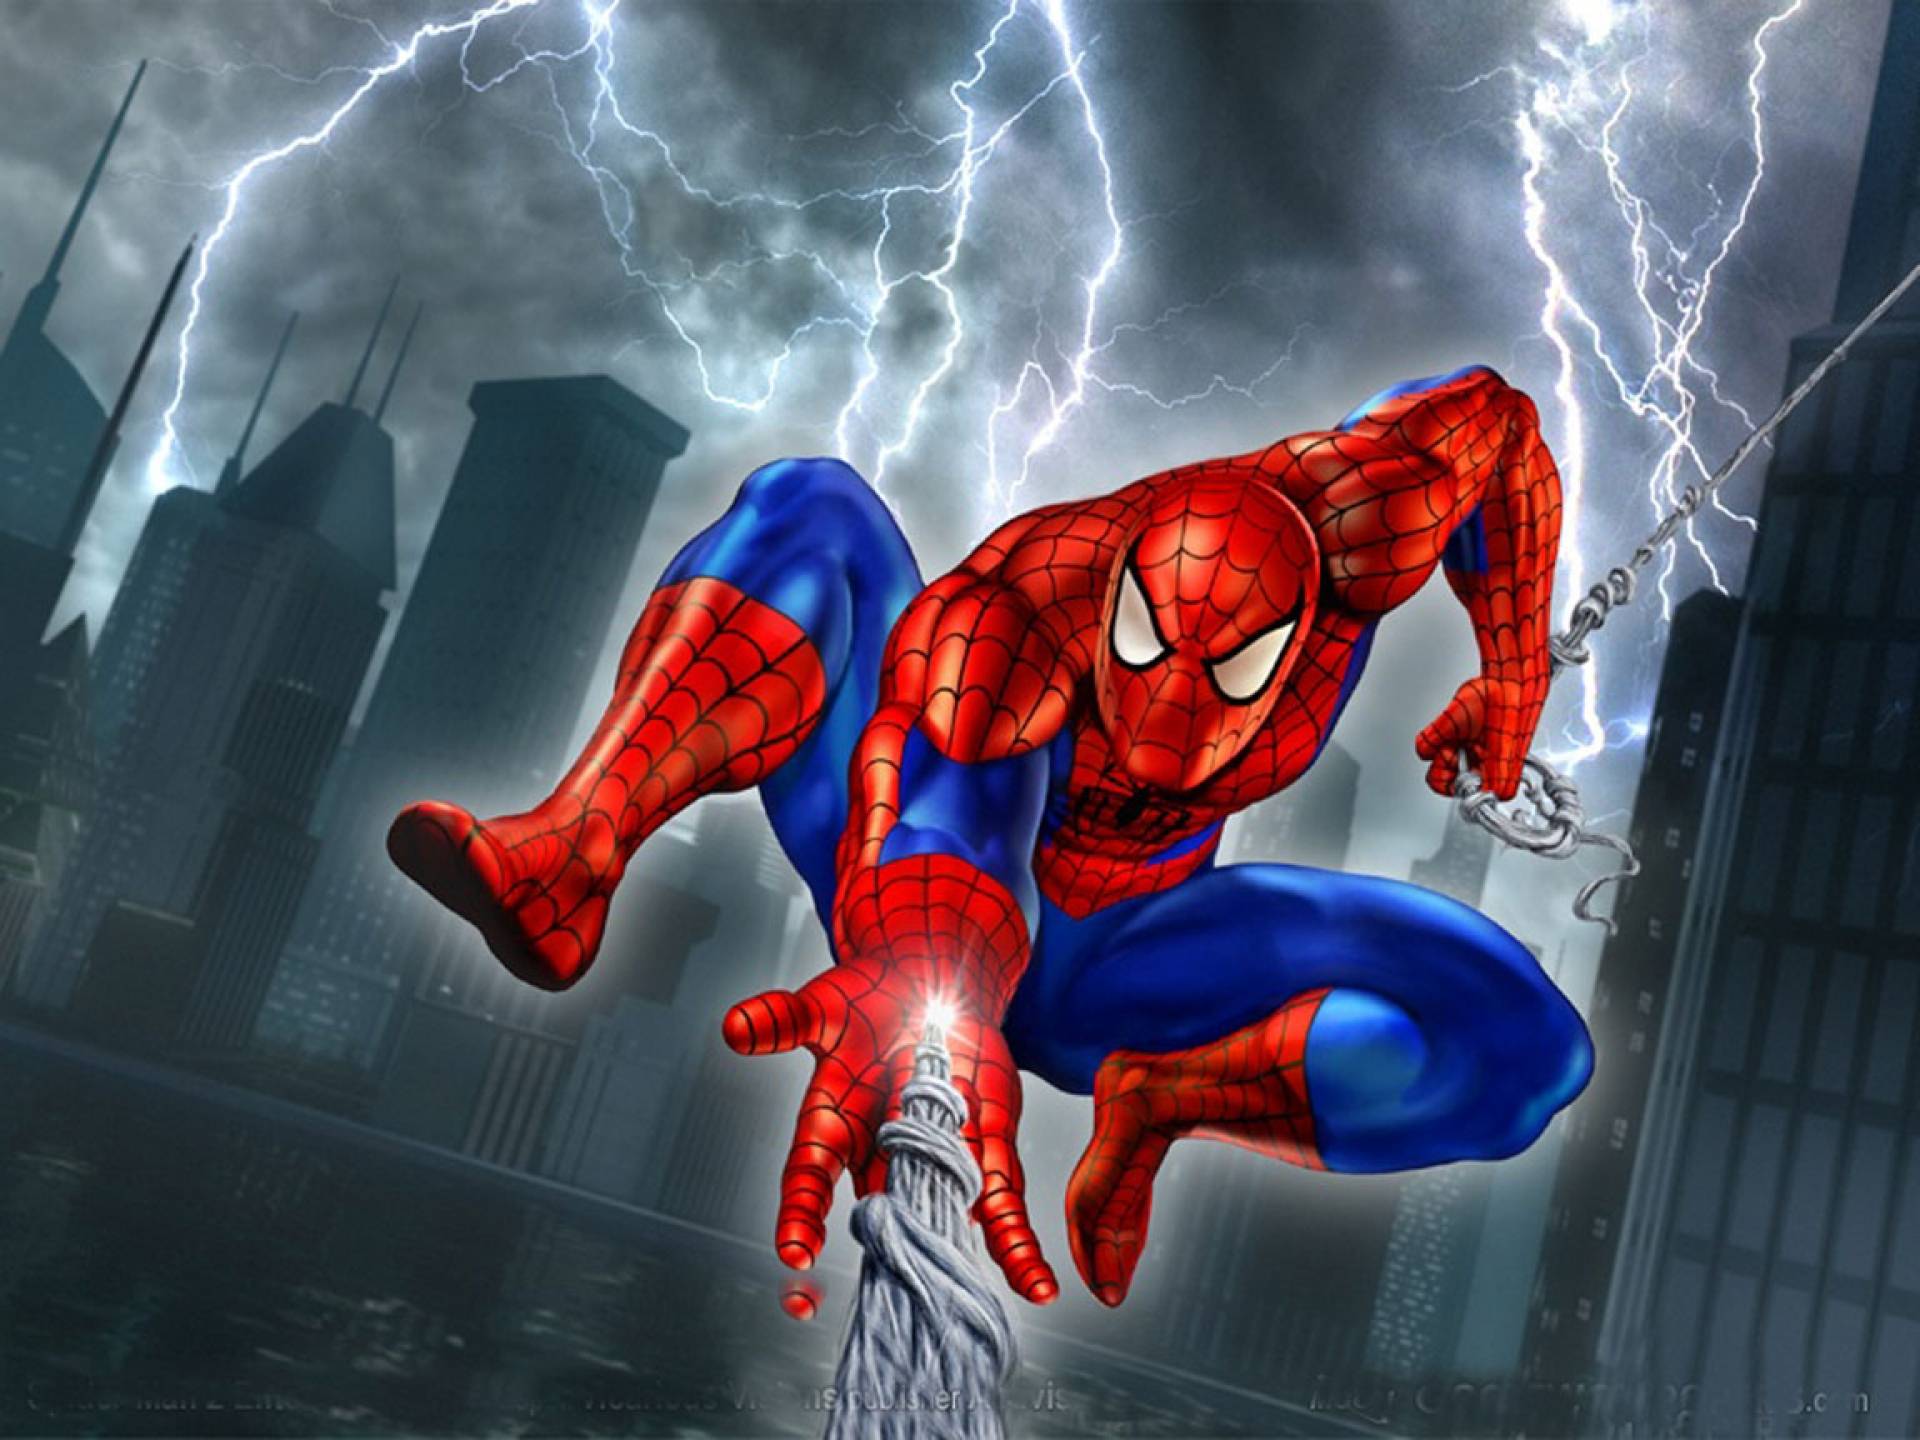 Spiderman Cartoon Wallpapers - Free Android Application ...